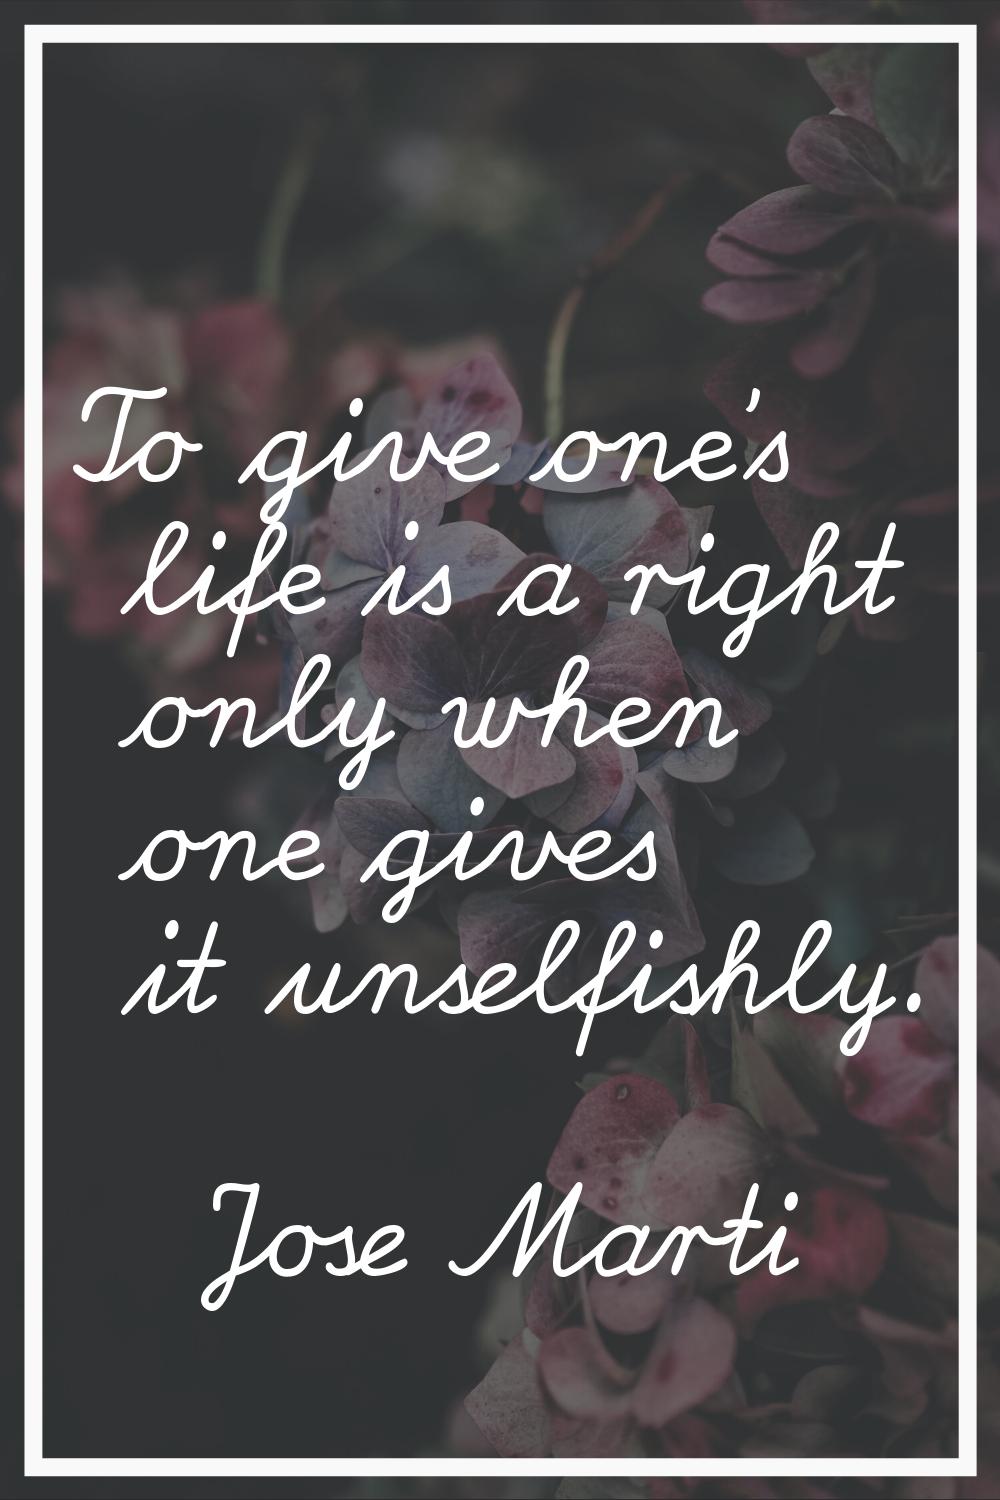 To give one's life is a right only when one gives it unselfishly.